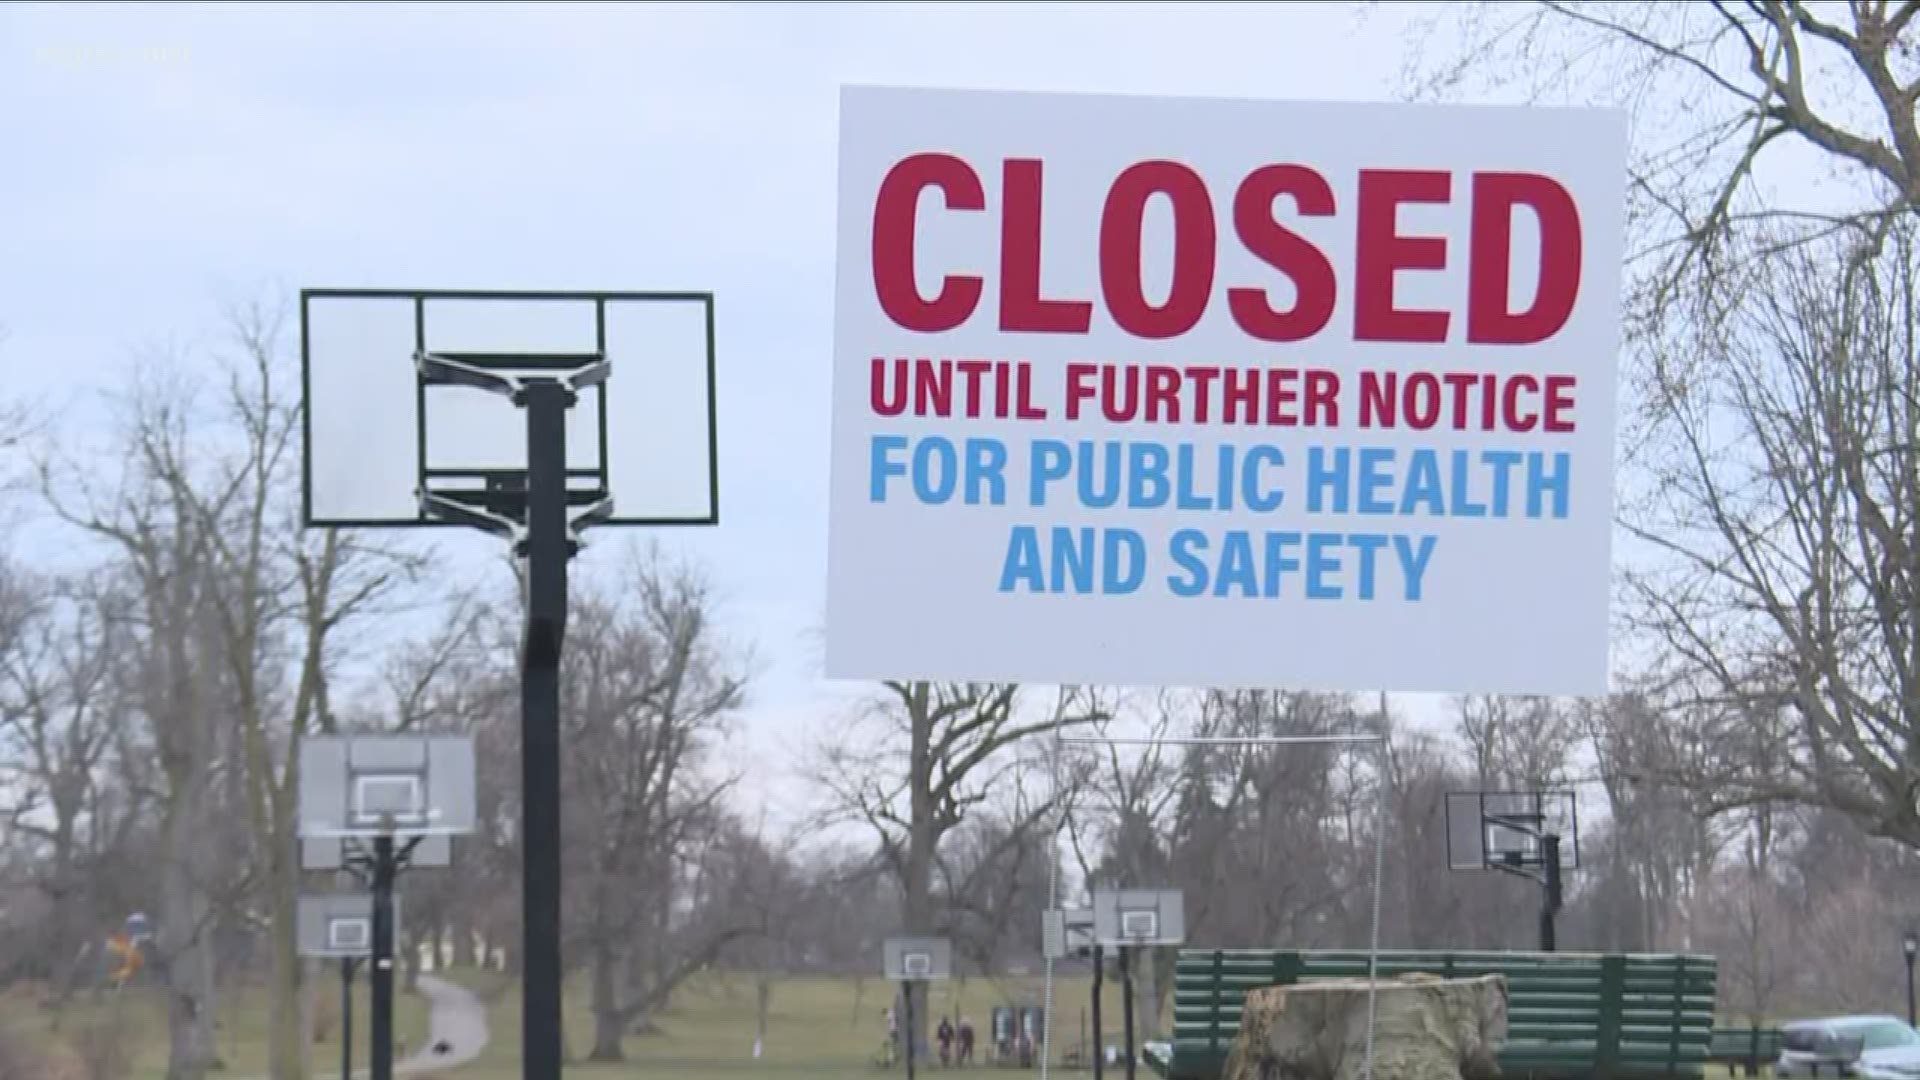 Similar to the warning from the city of Buffalo yesterday, Amherst is urging people who live there, 
to not use any playgrounds or athletic facilities.